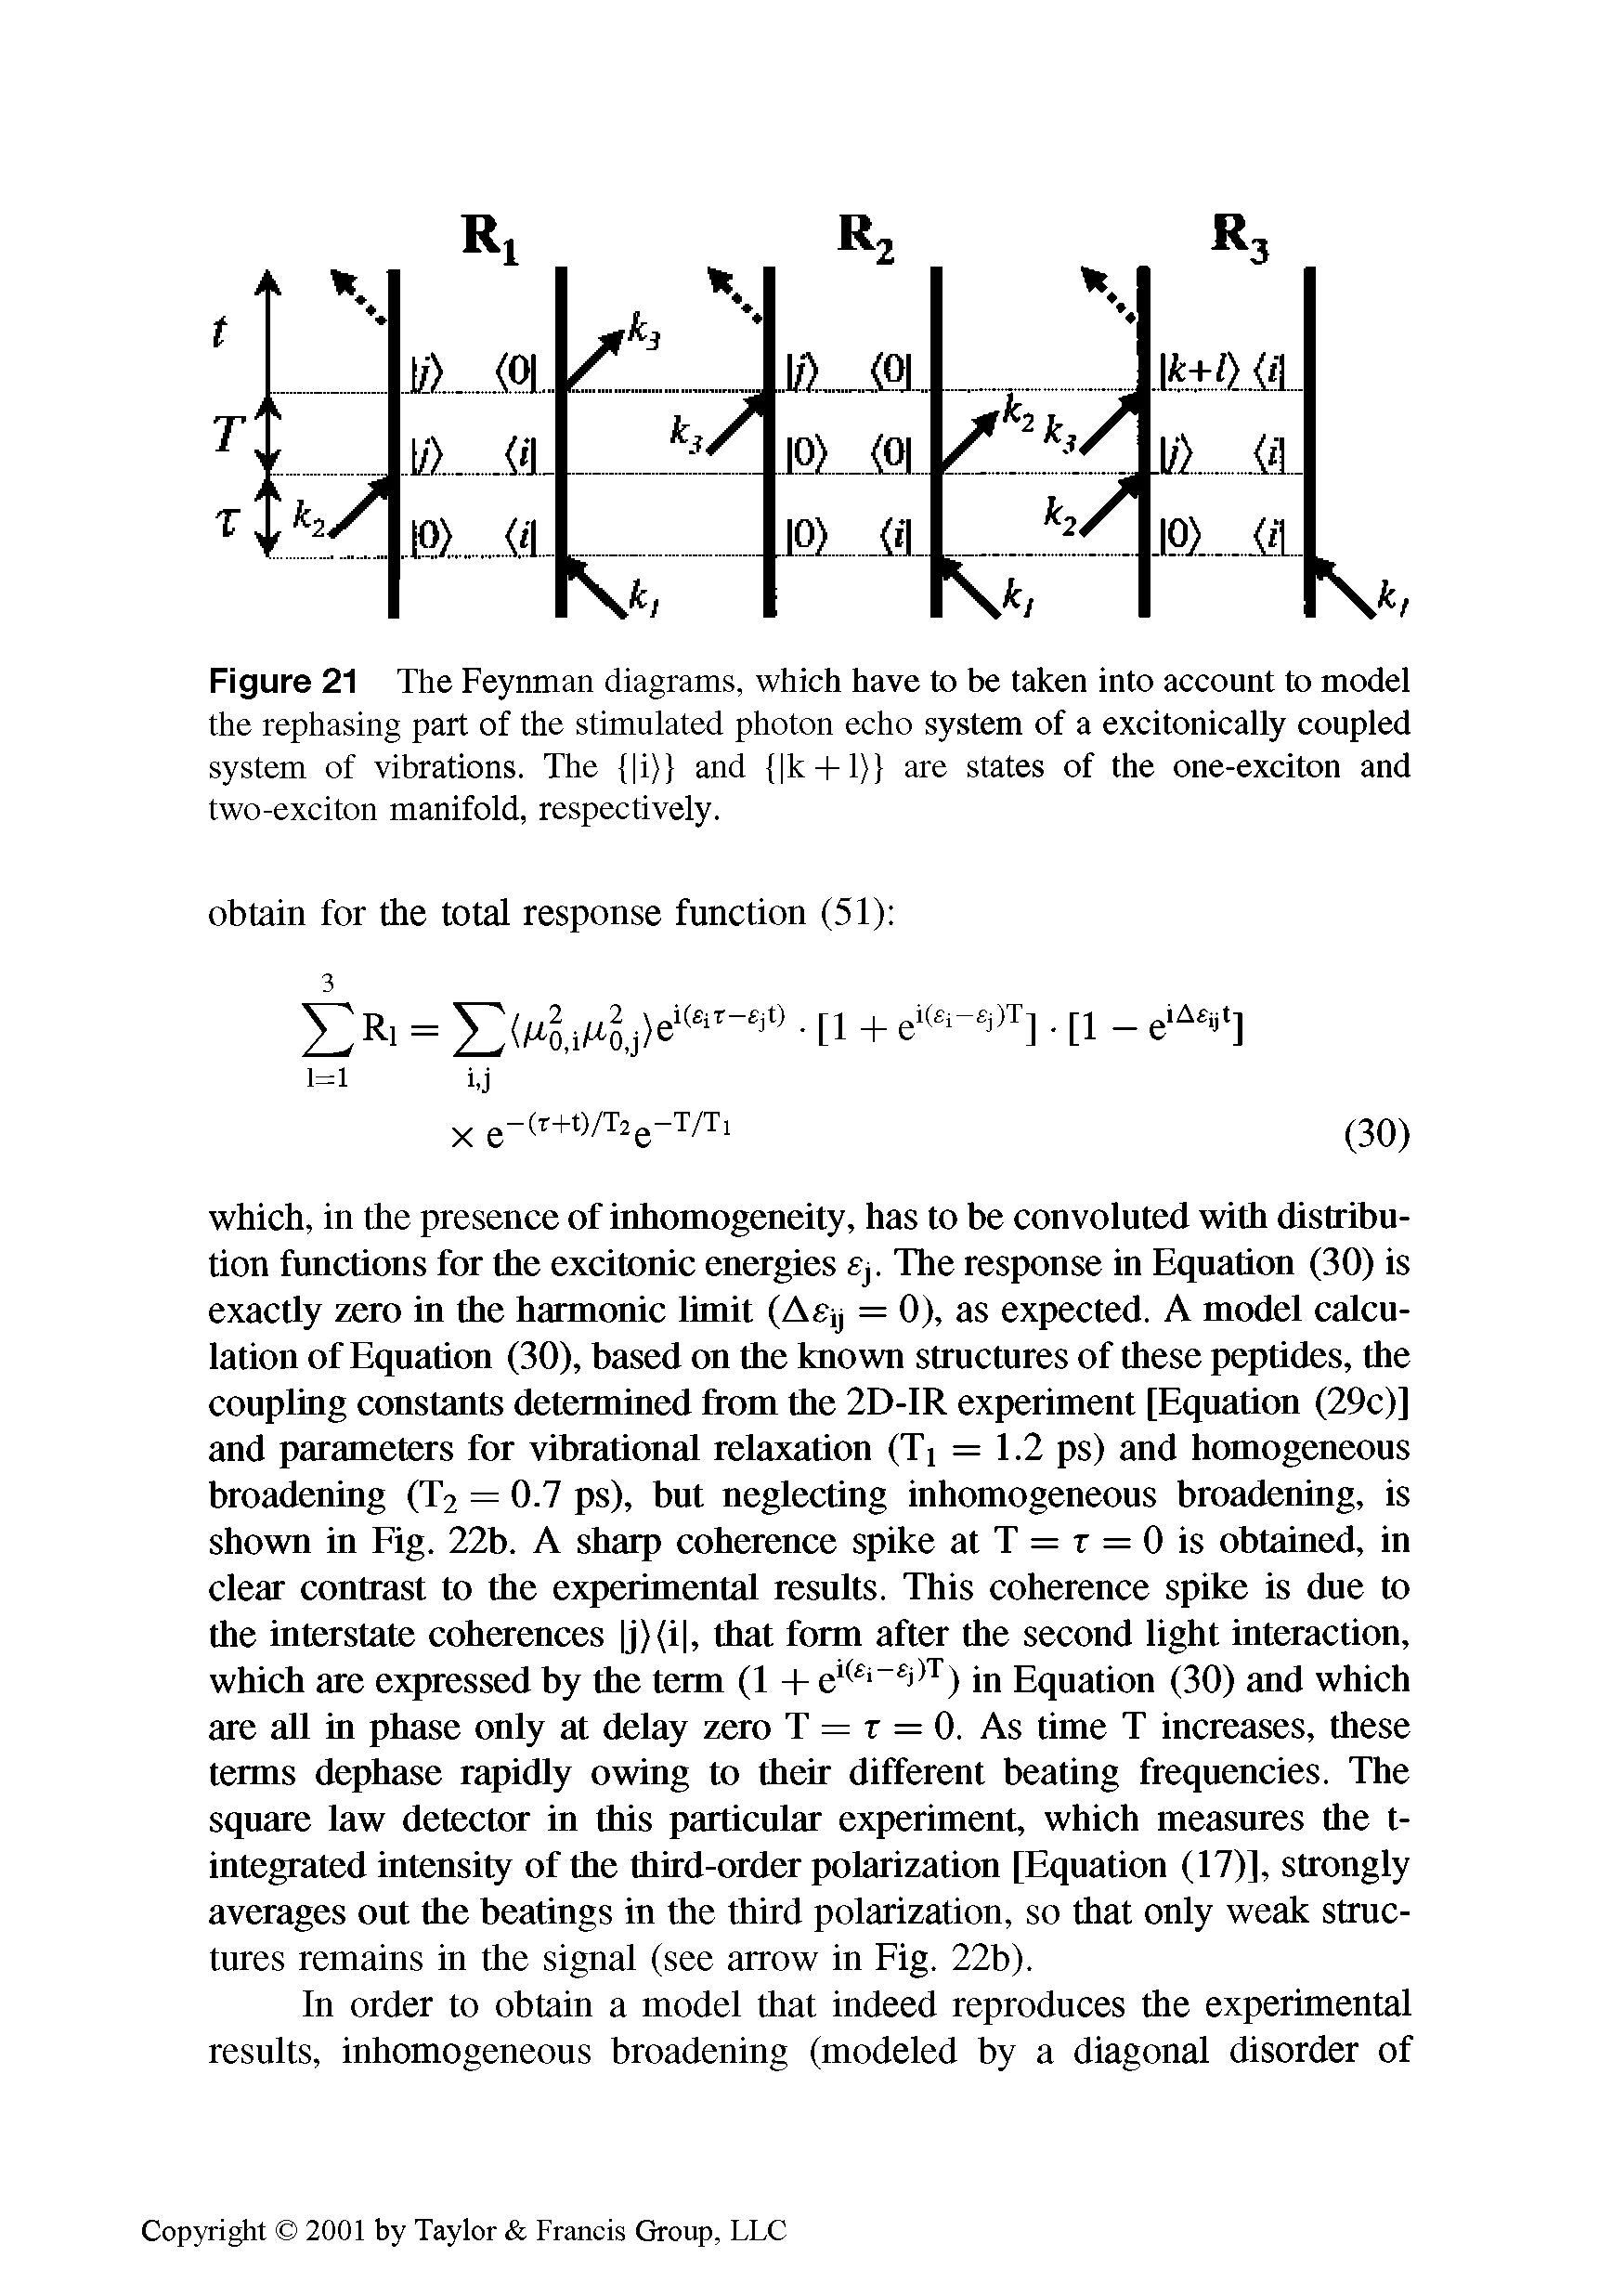 Figure 21 The Feynman diagrams, which have to be taken into account to model the rephasing part of the stimulated photon echo system of a excitonically coupled system of vibrations. The i and k +1 are states of the one-exciton and two-exciton manifold, respectively.